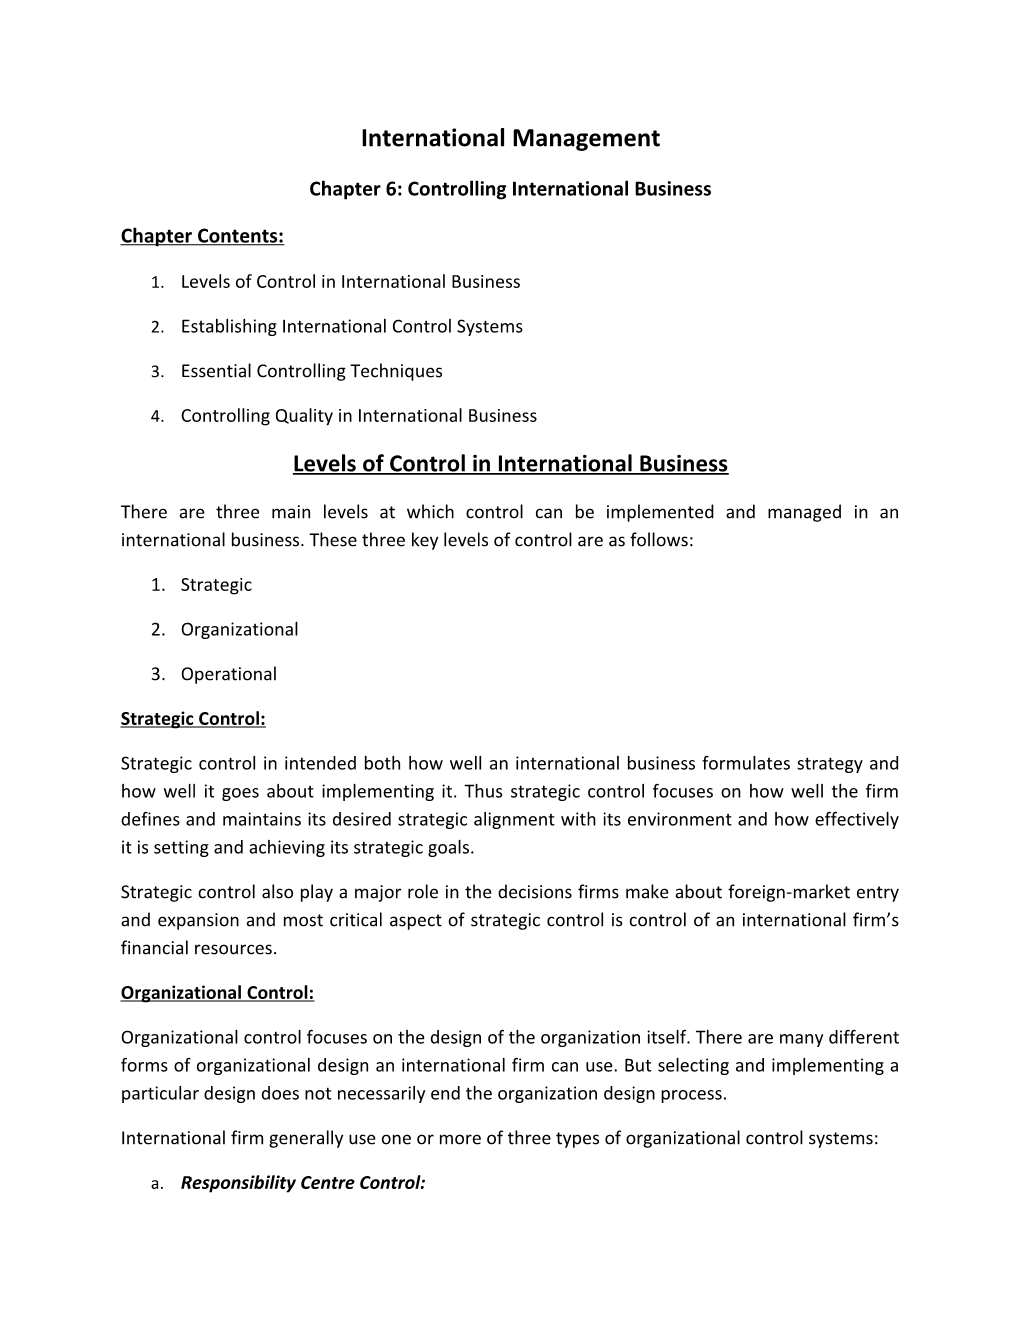 Chapter 6: Controlling International Business